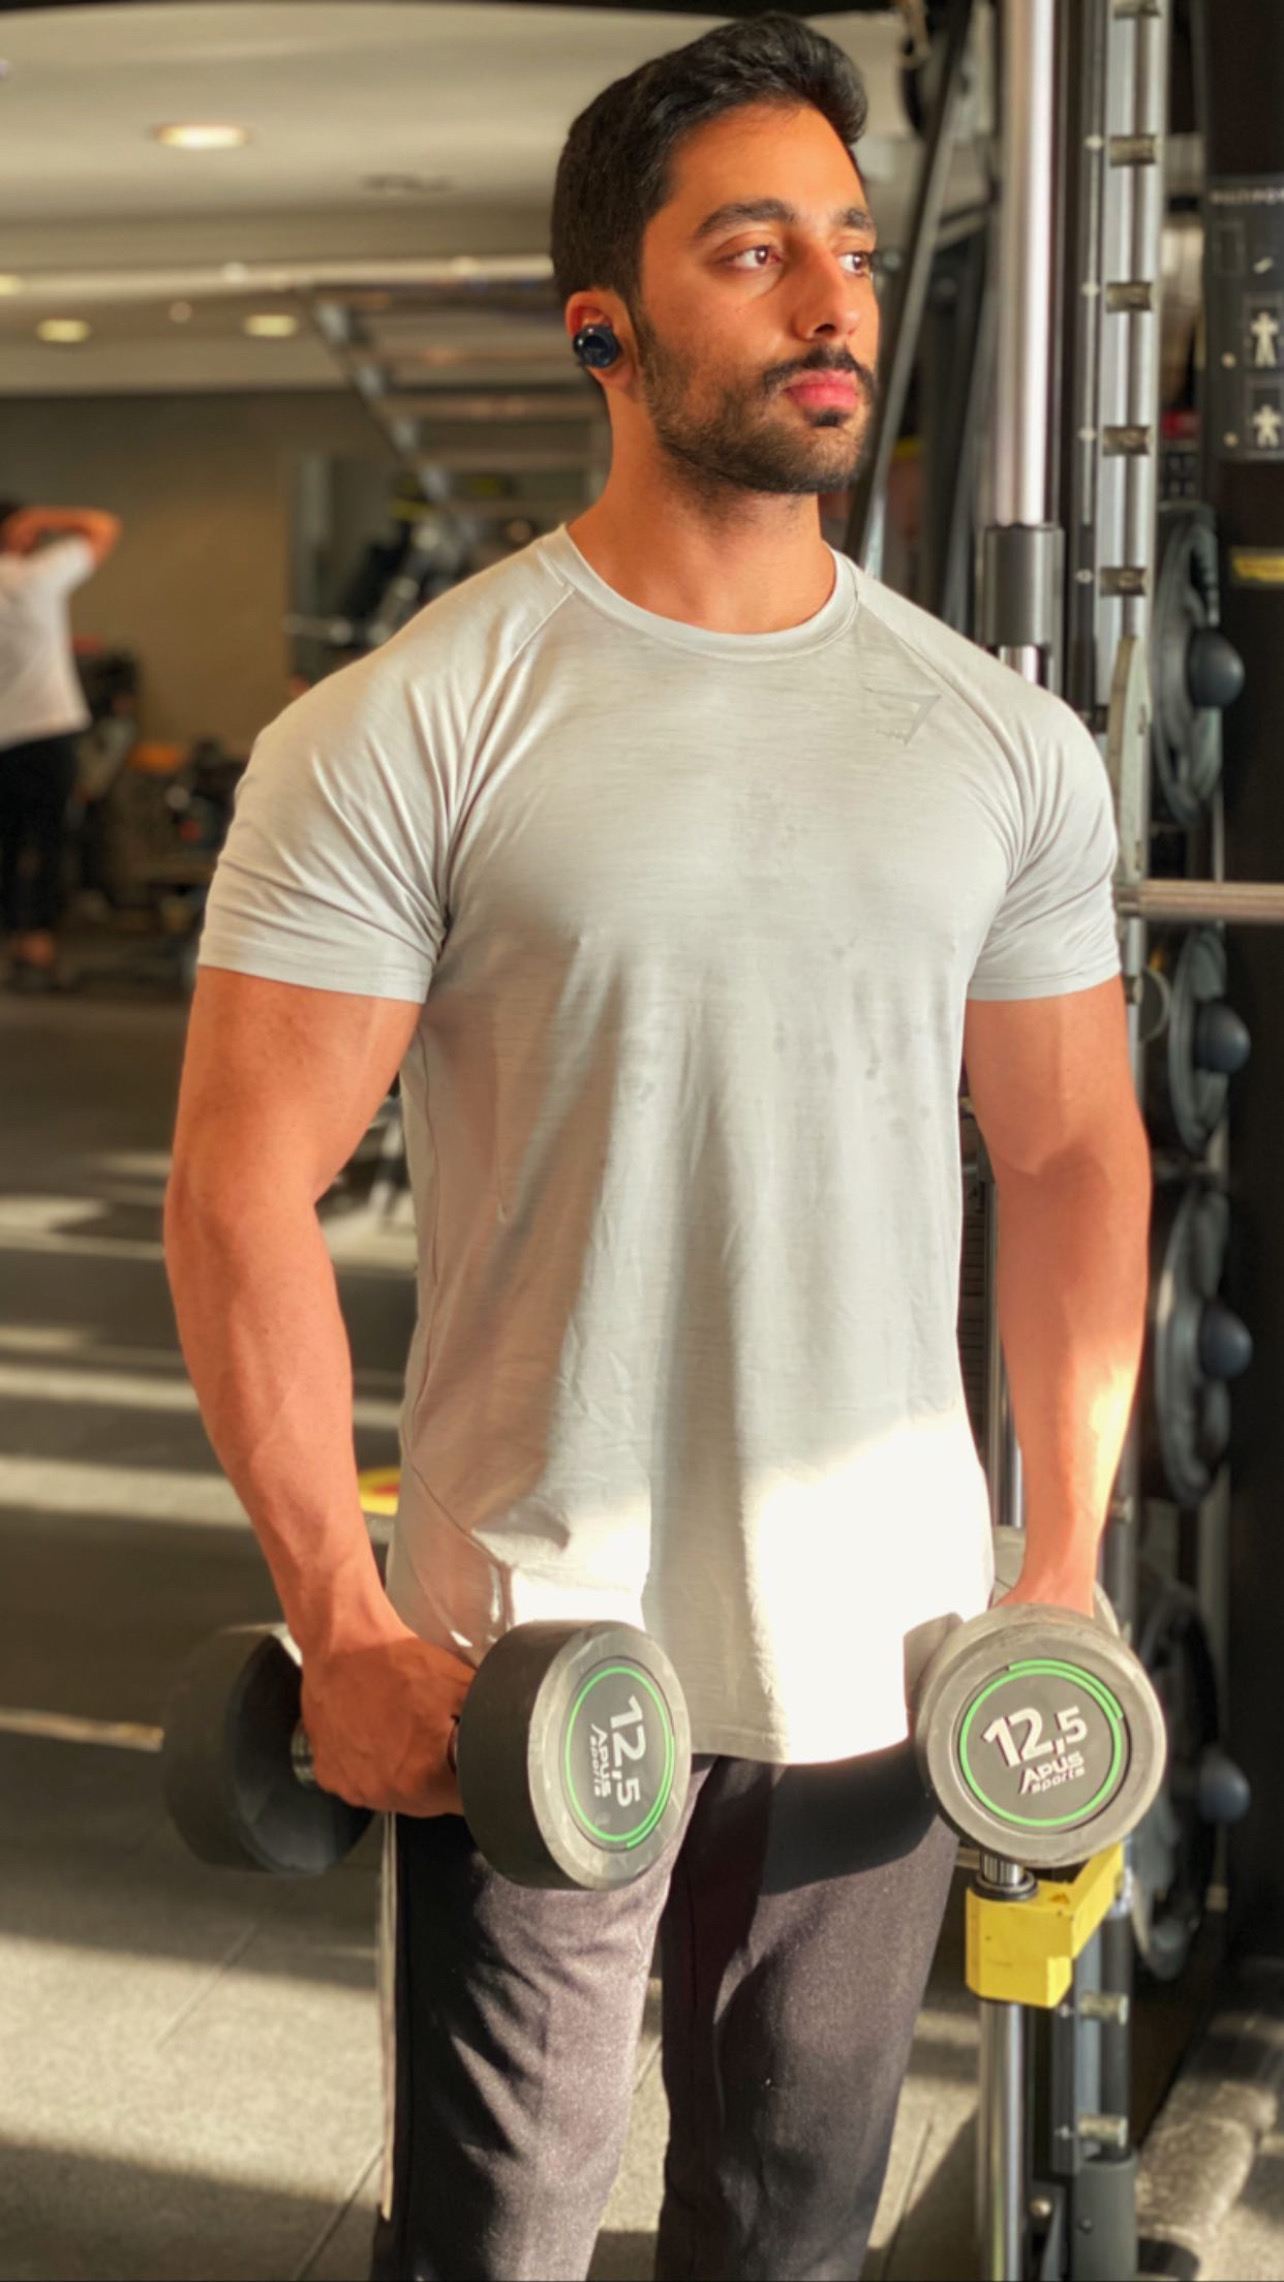 Personal trainer Abdulla Bahzad helps people achieve their fitness goals